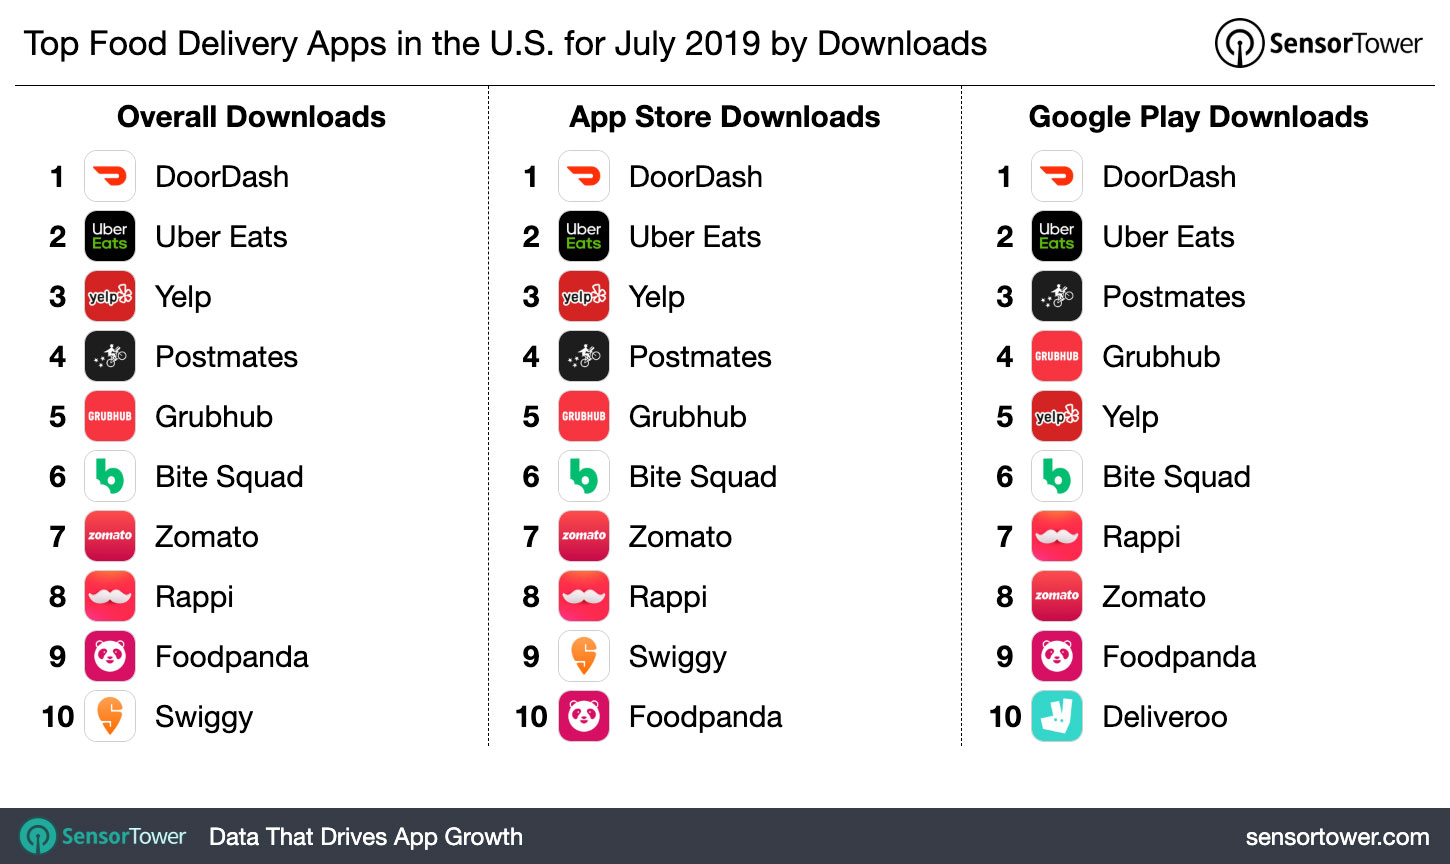 Top Food Delivery Apps in the US for July 2019 by SensorTower